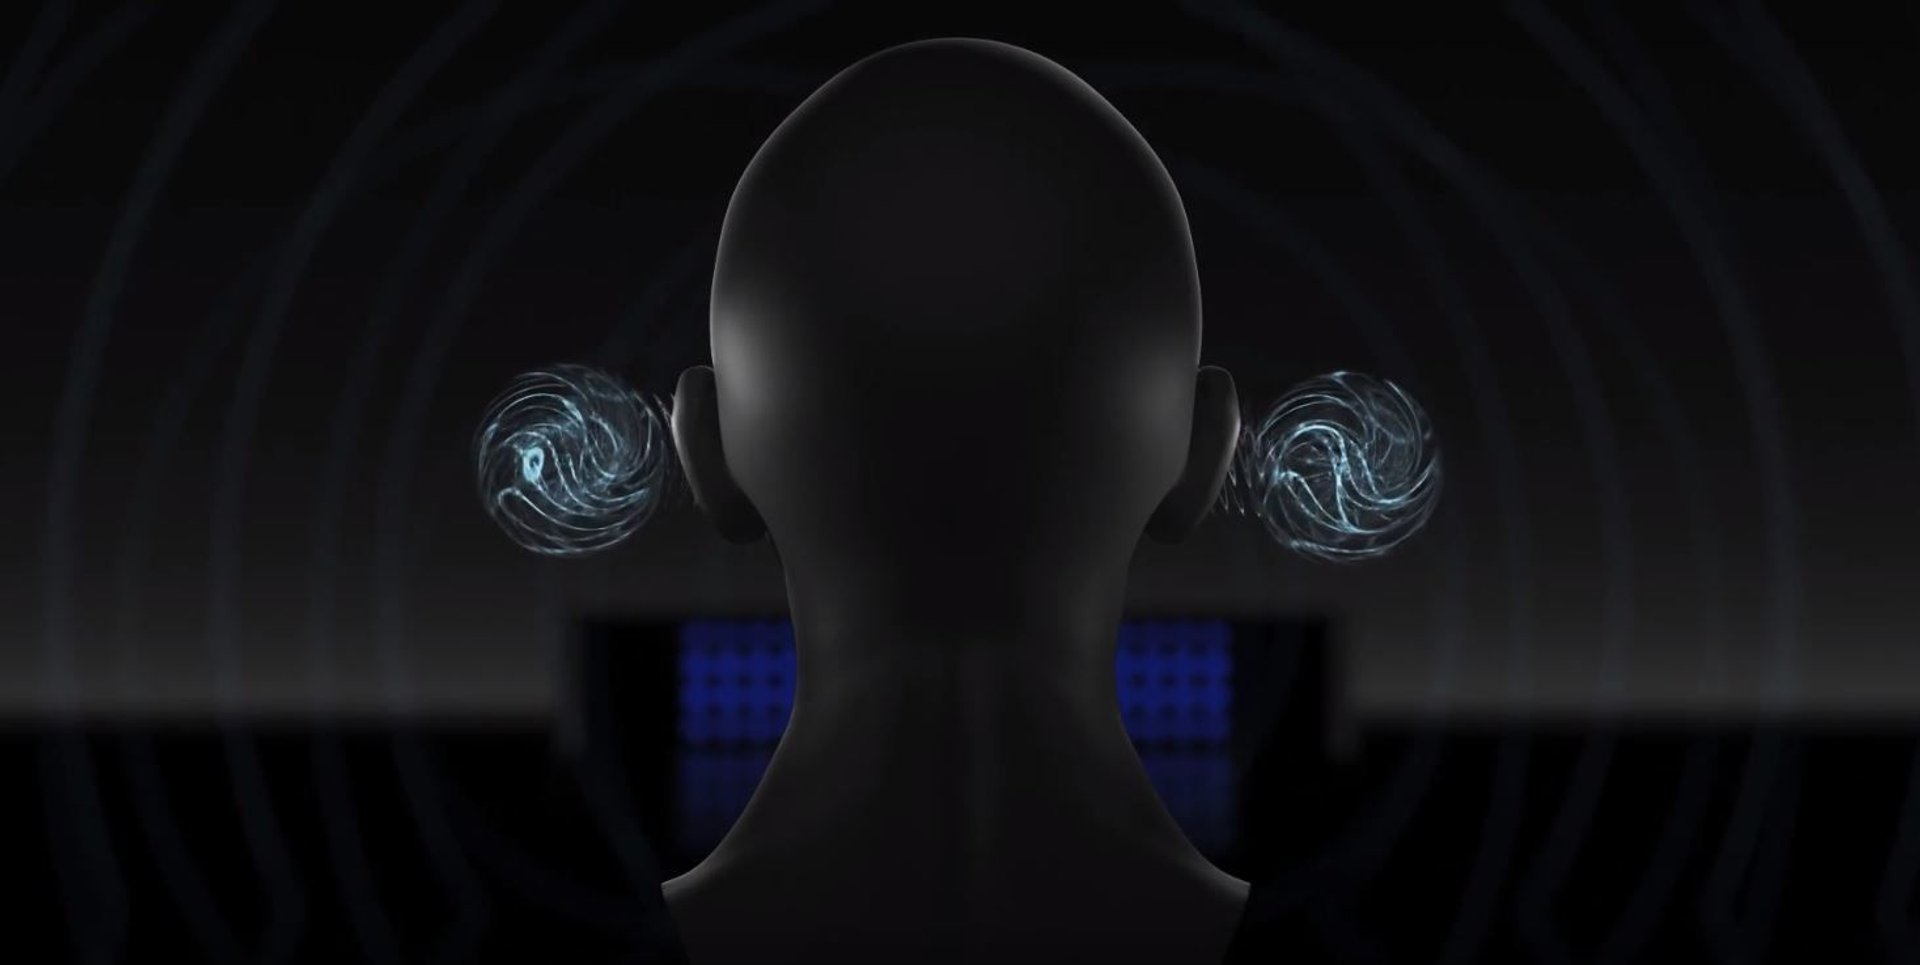 Fragment filmu, pt. New device puts music in your head - no headphones required